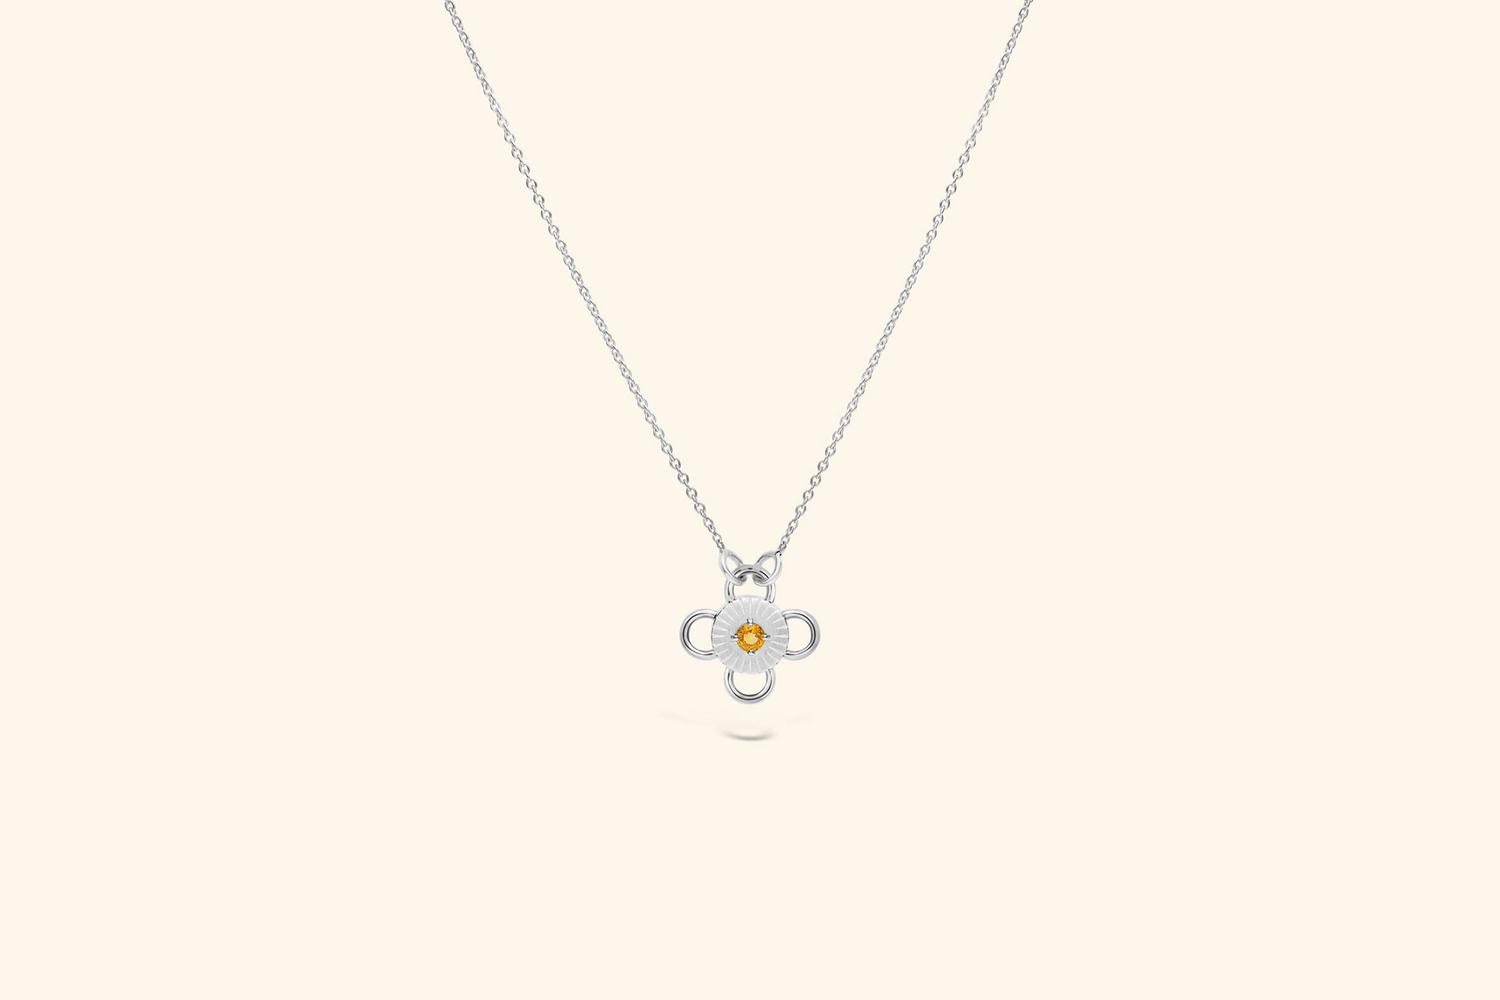 Baby Bolt Necklacea ~0.2 carat yellow sapphire set in silver. 